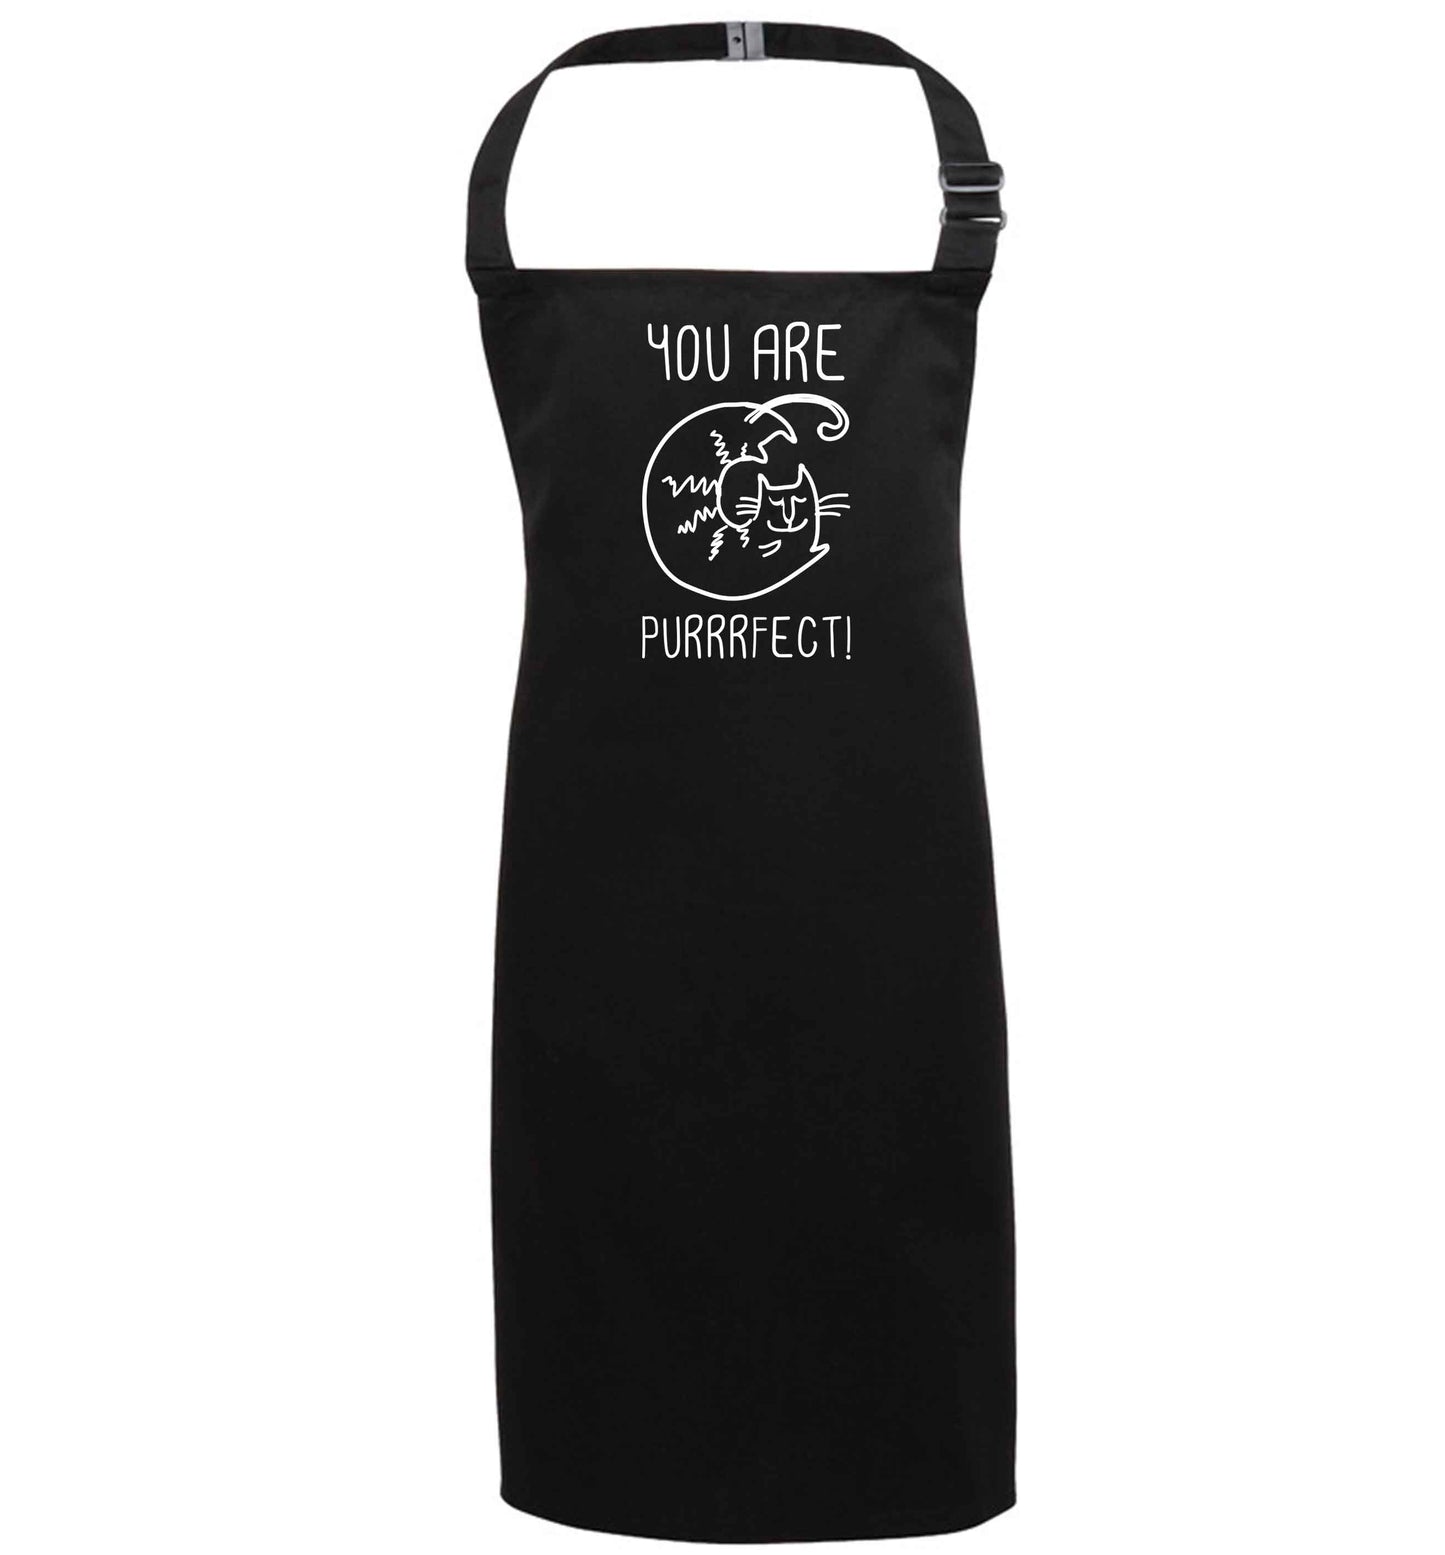 You are purrfect black apron 7-10 years